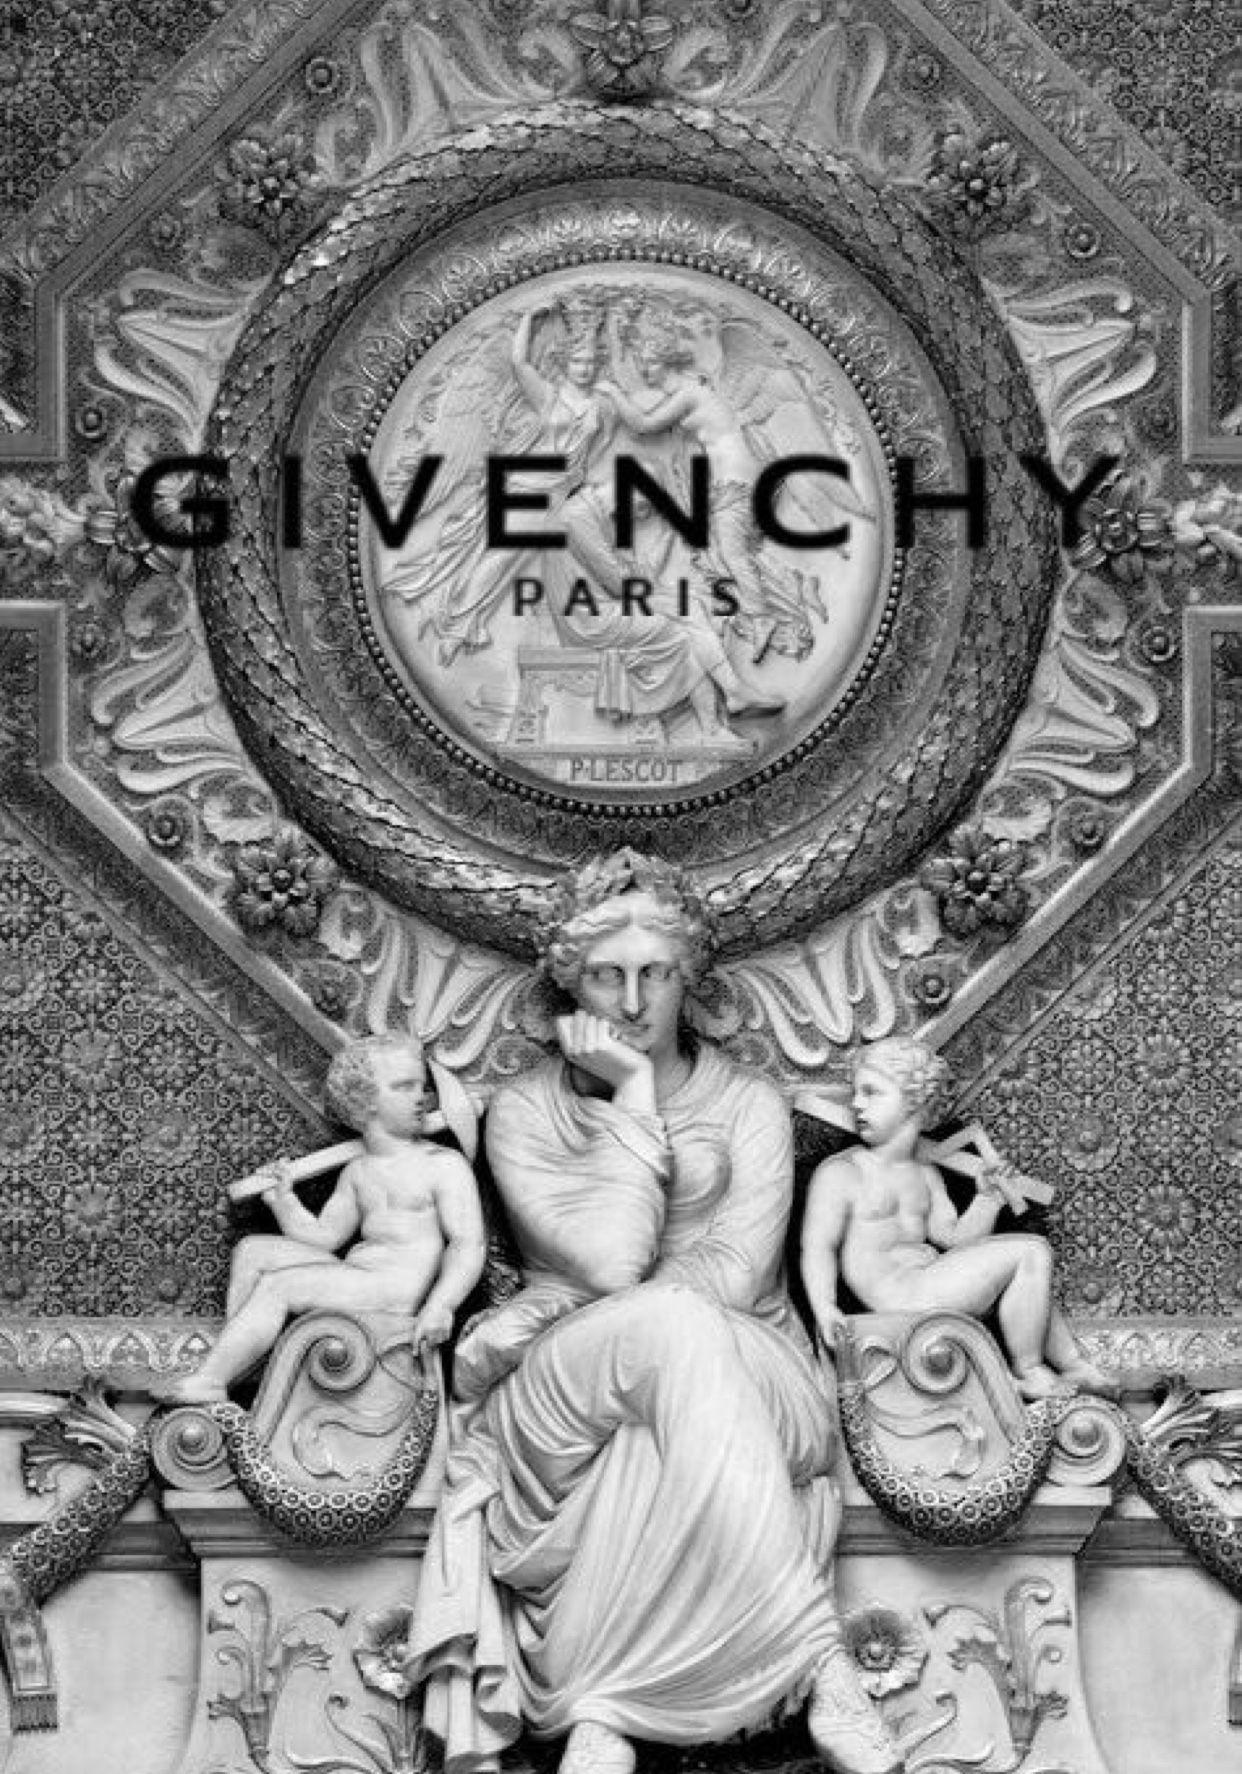 givenchy wallpaper iphone